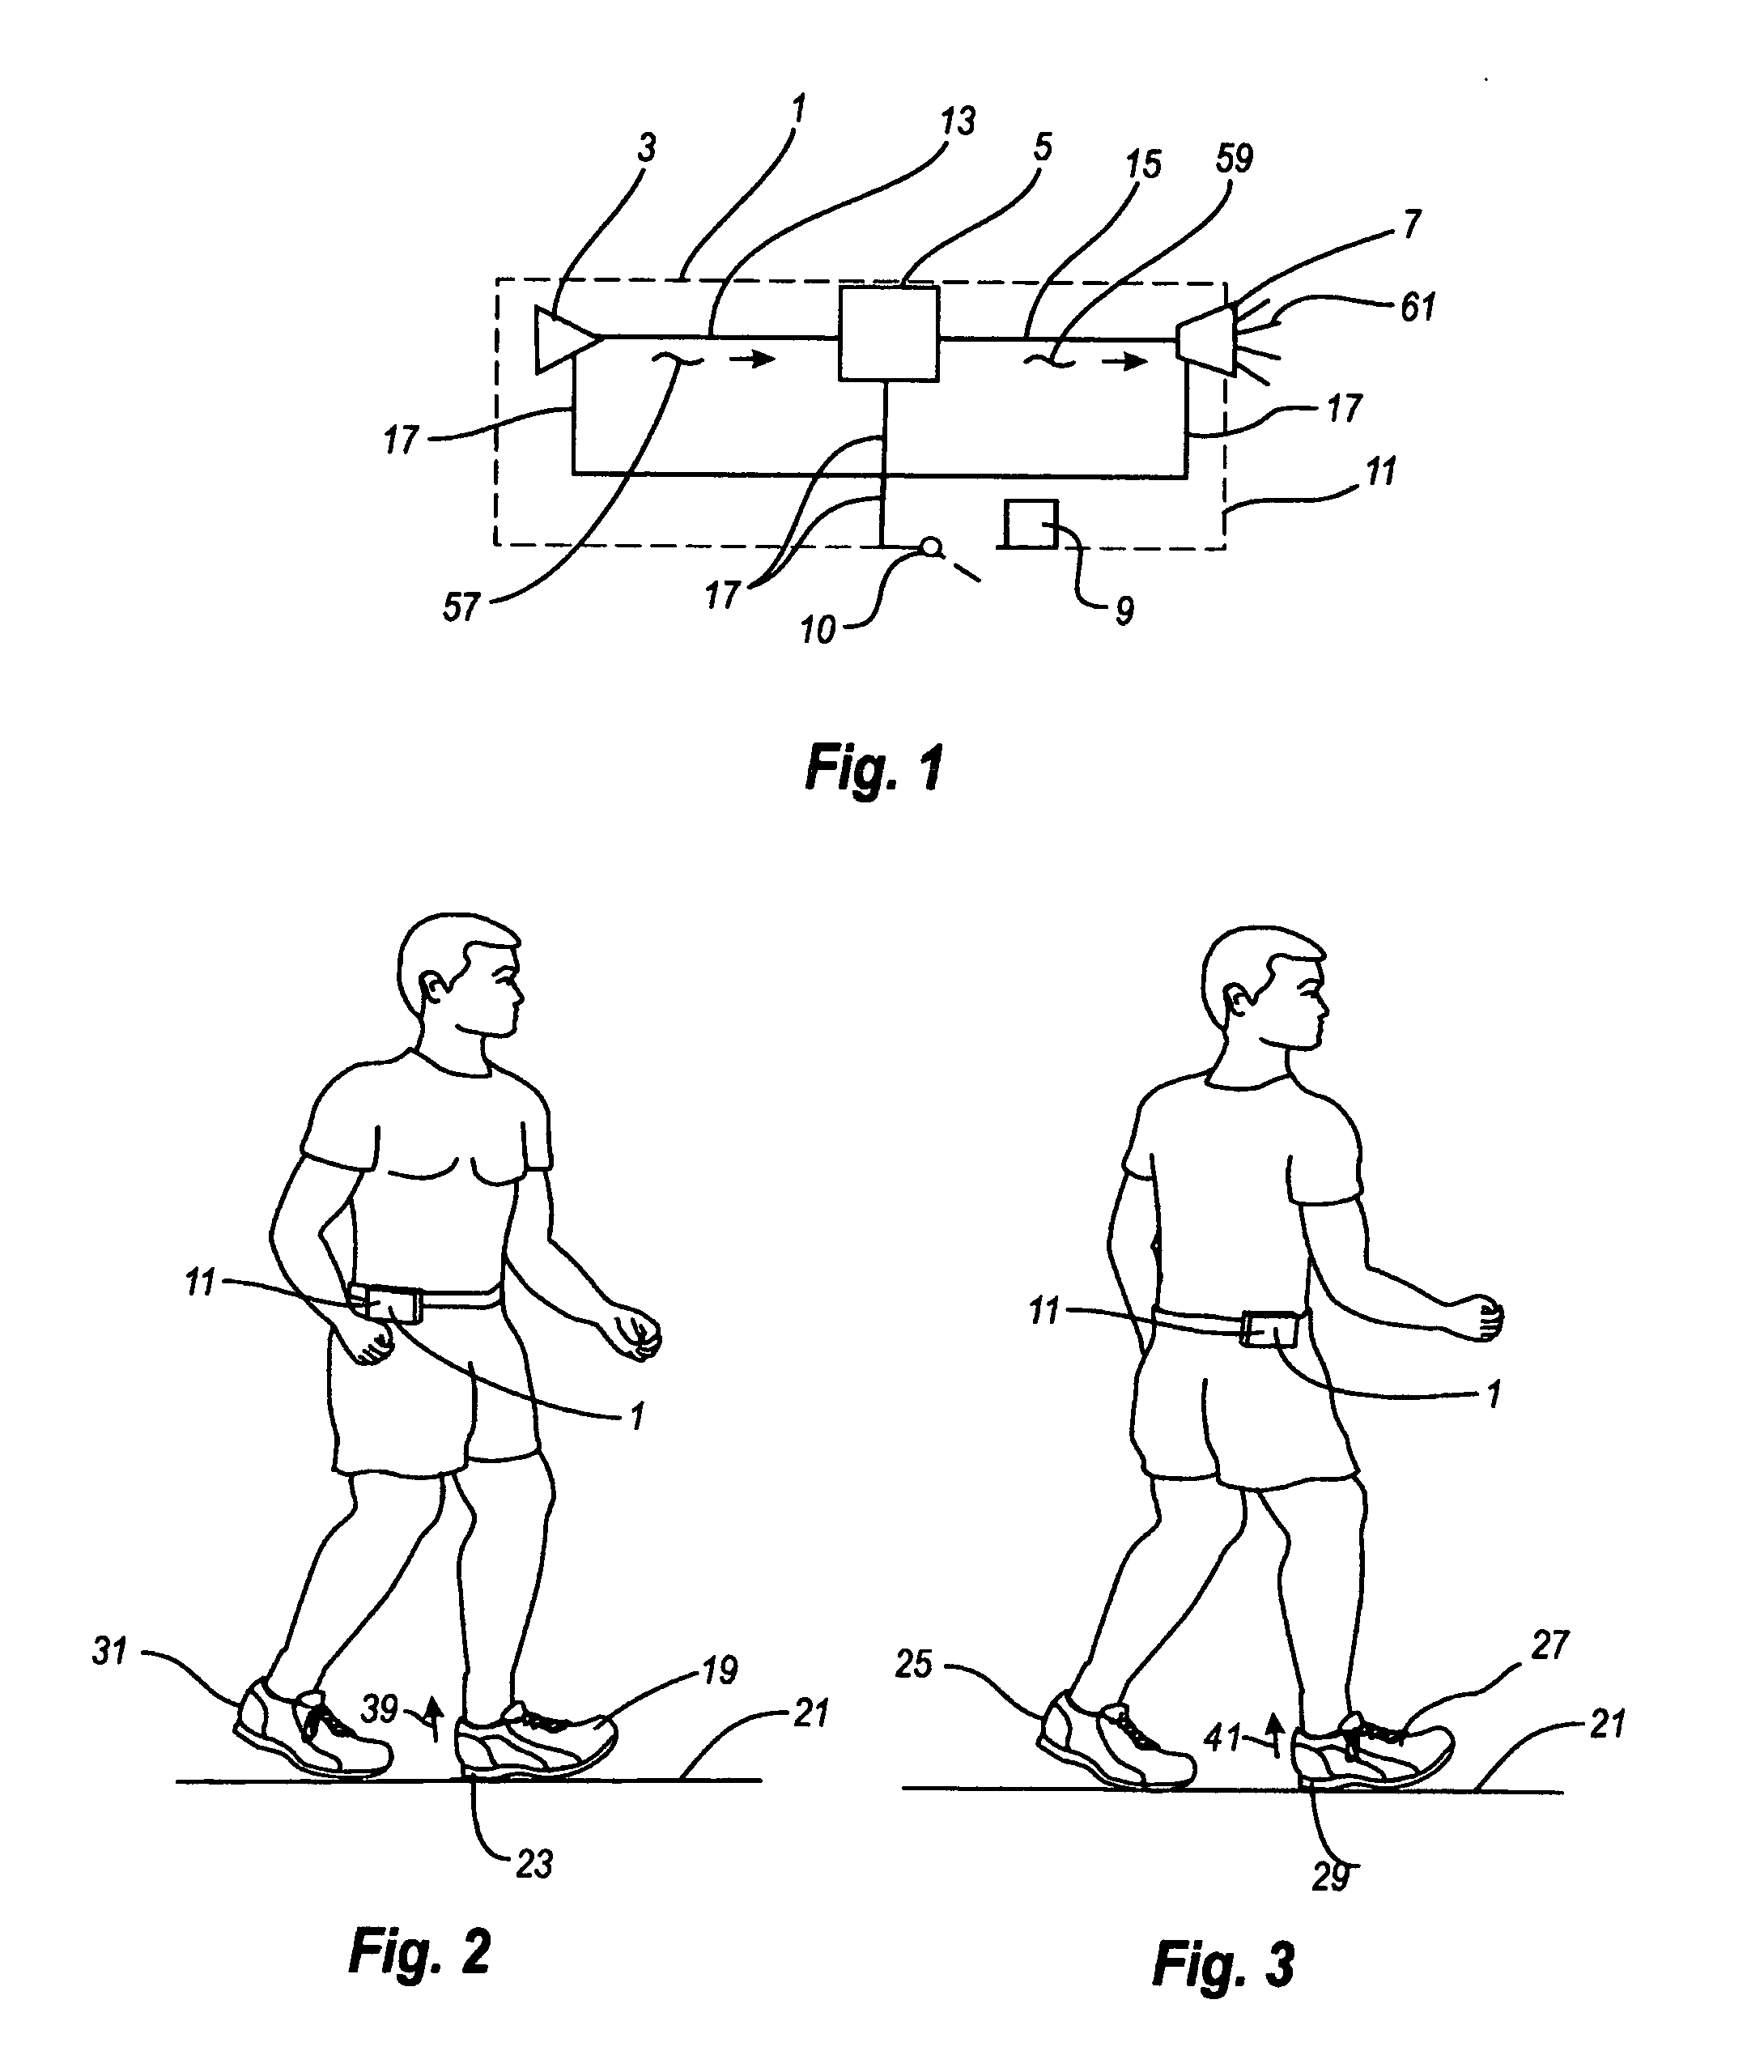 Self-contained real-time gait therapy device